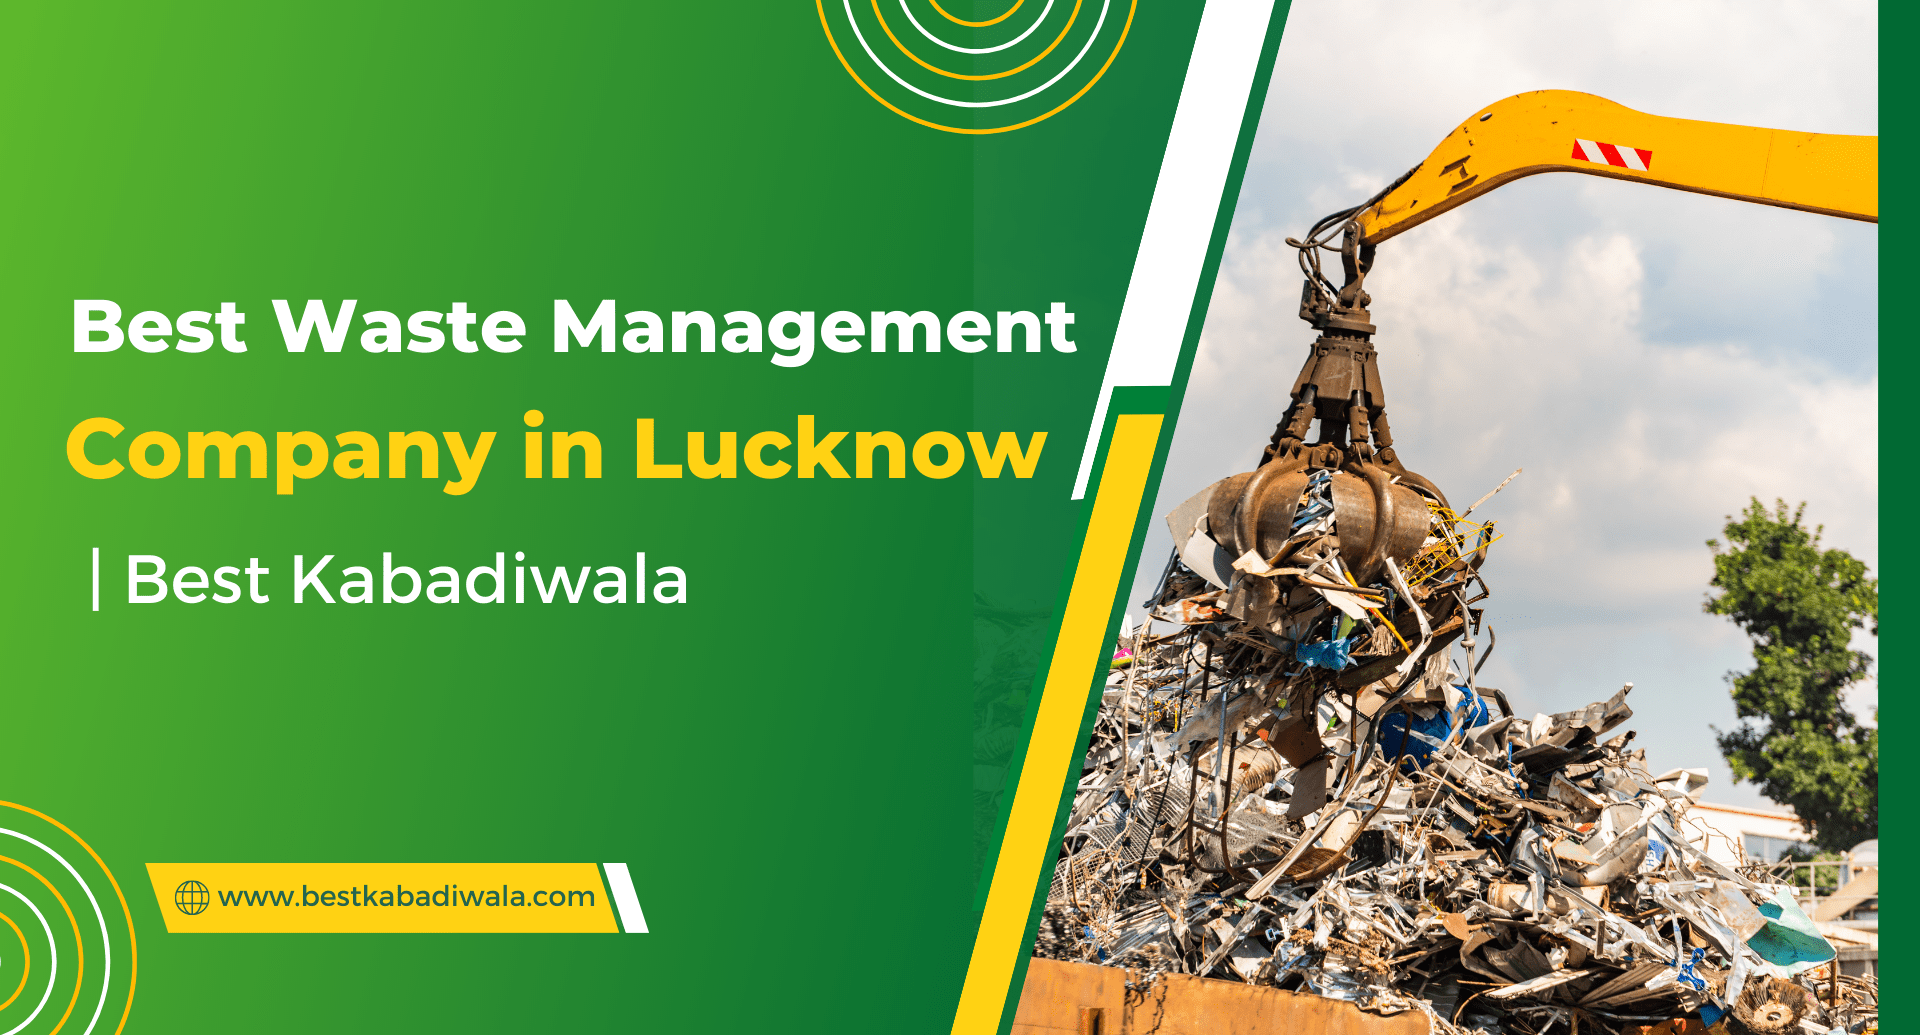 Best Waste Management Company in Lucknow